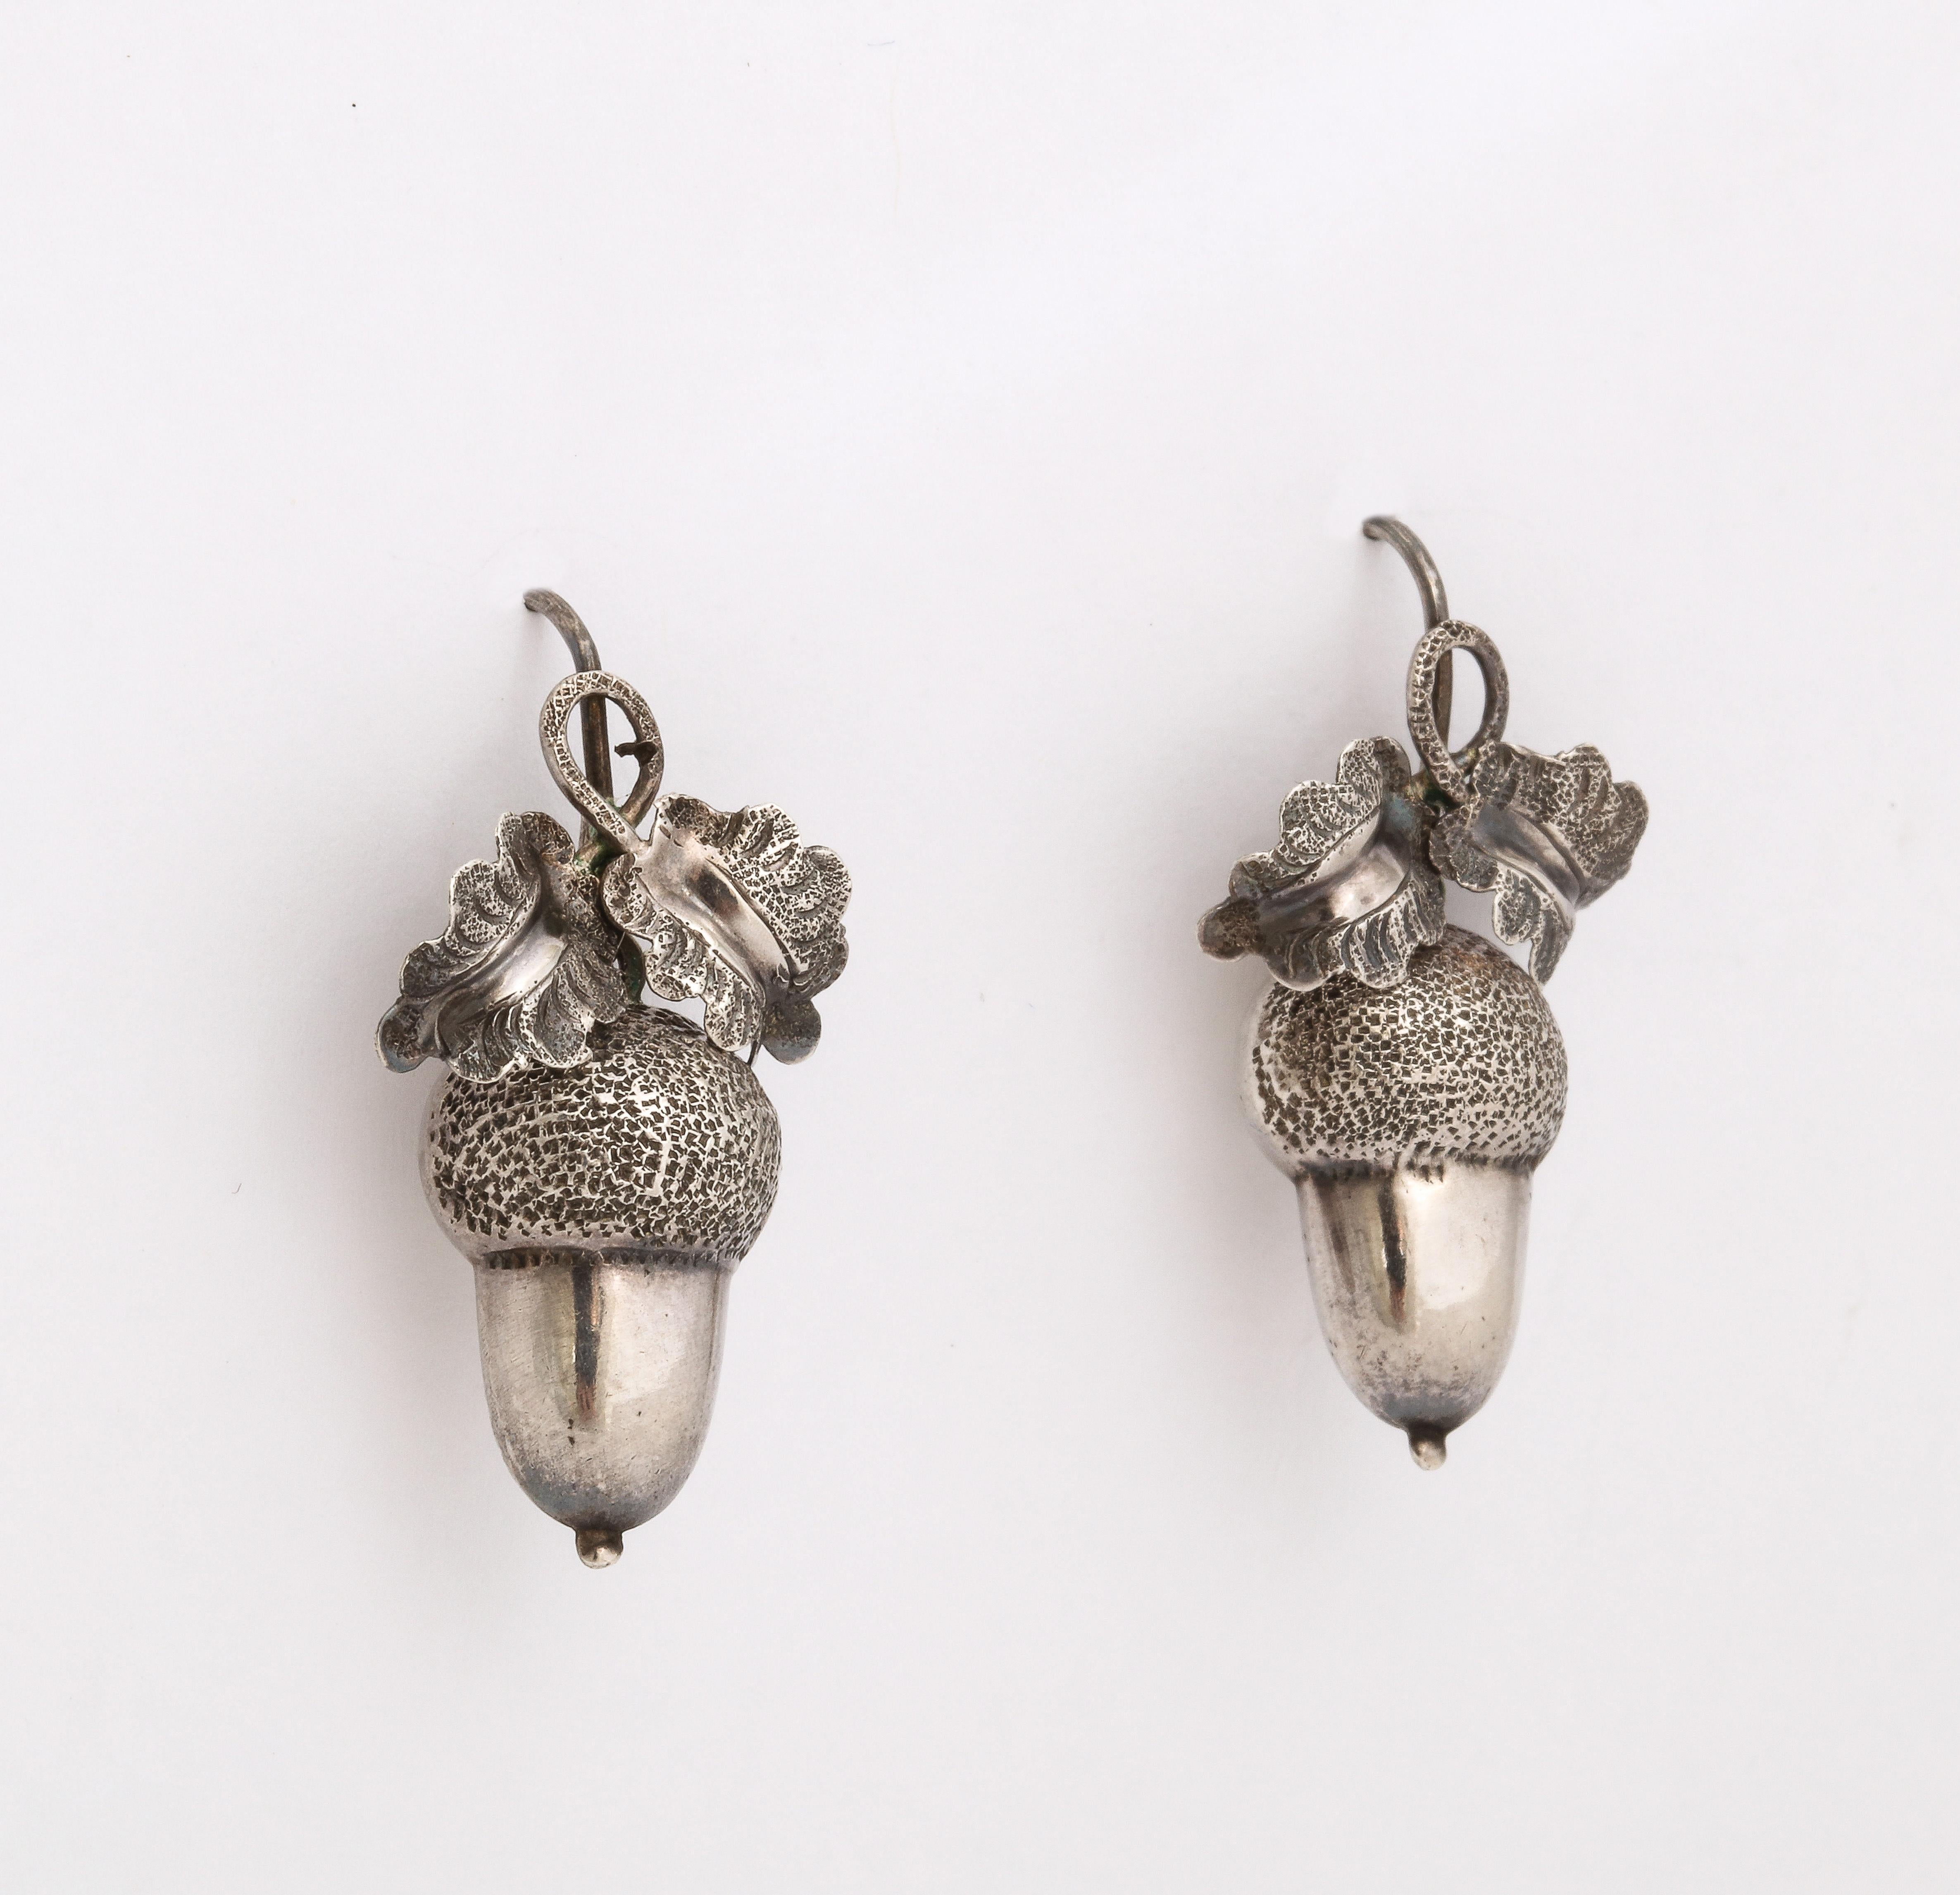 From the. mighty oak the little acorn springs is the spirit of these Victorian Silver Acorn earrings.
Stability, strength, growth, and prosperity is the .symbolism of the acorn. Perhaps this is why acorn earrings are popular. Realistic from top to